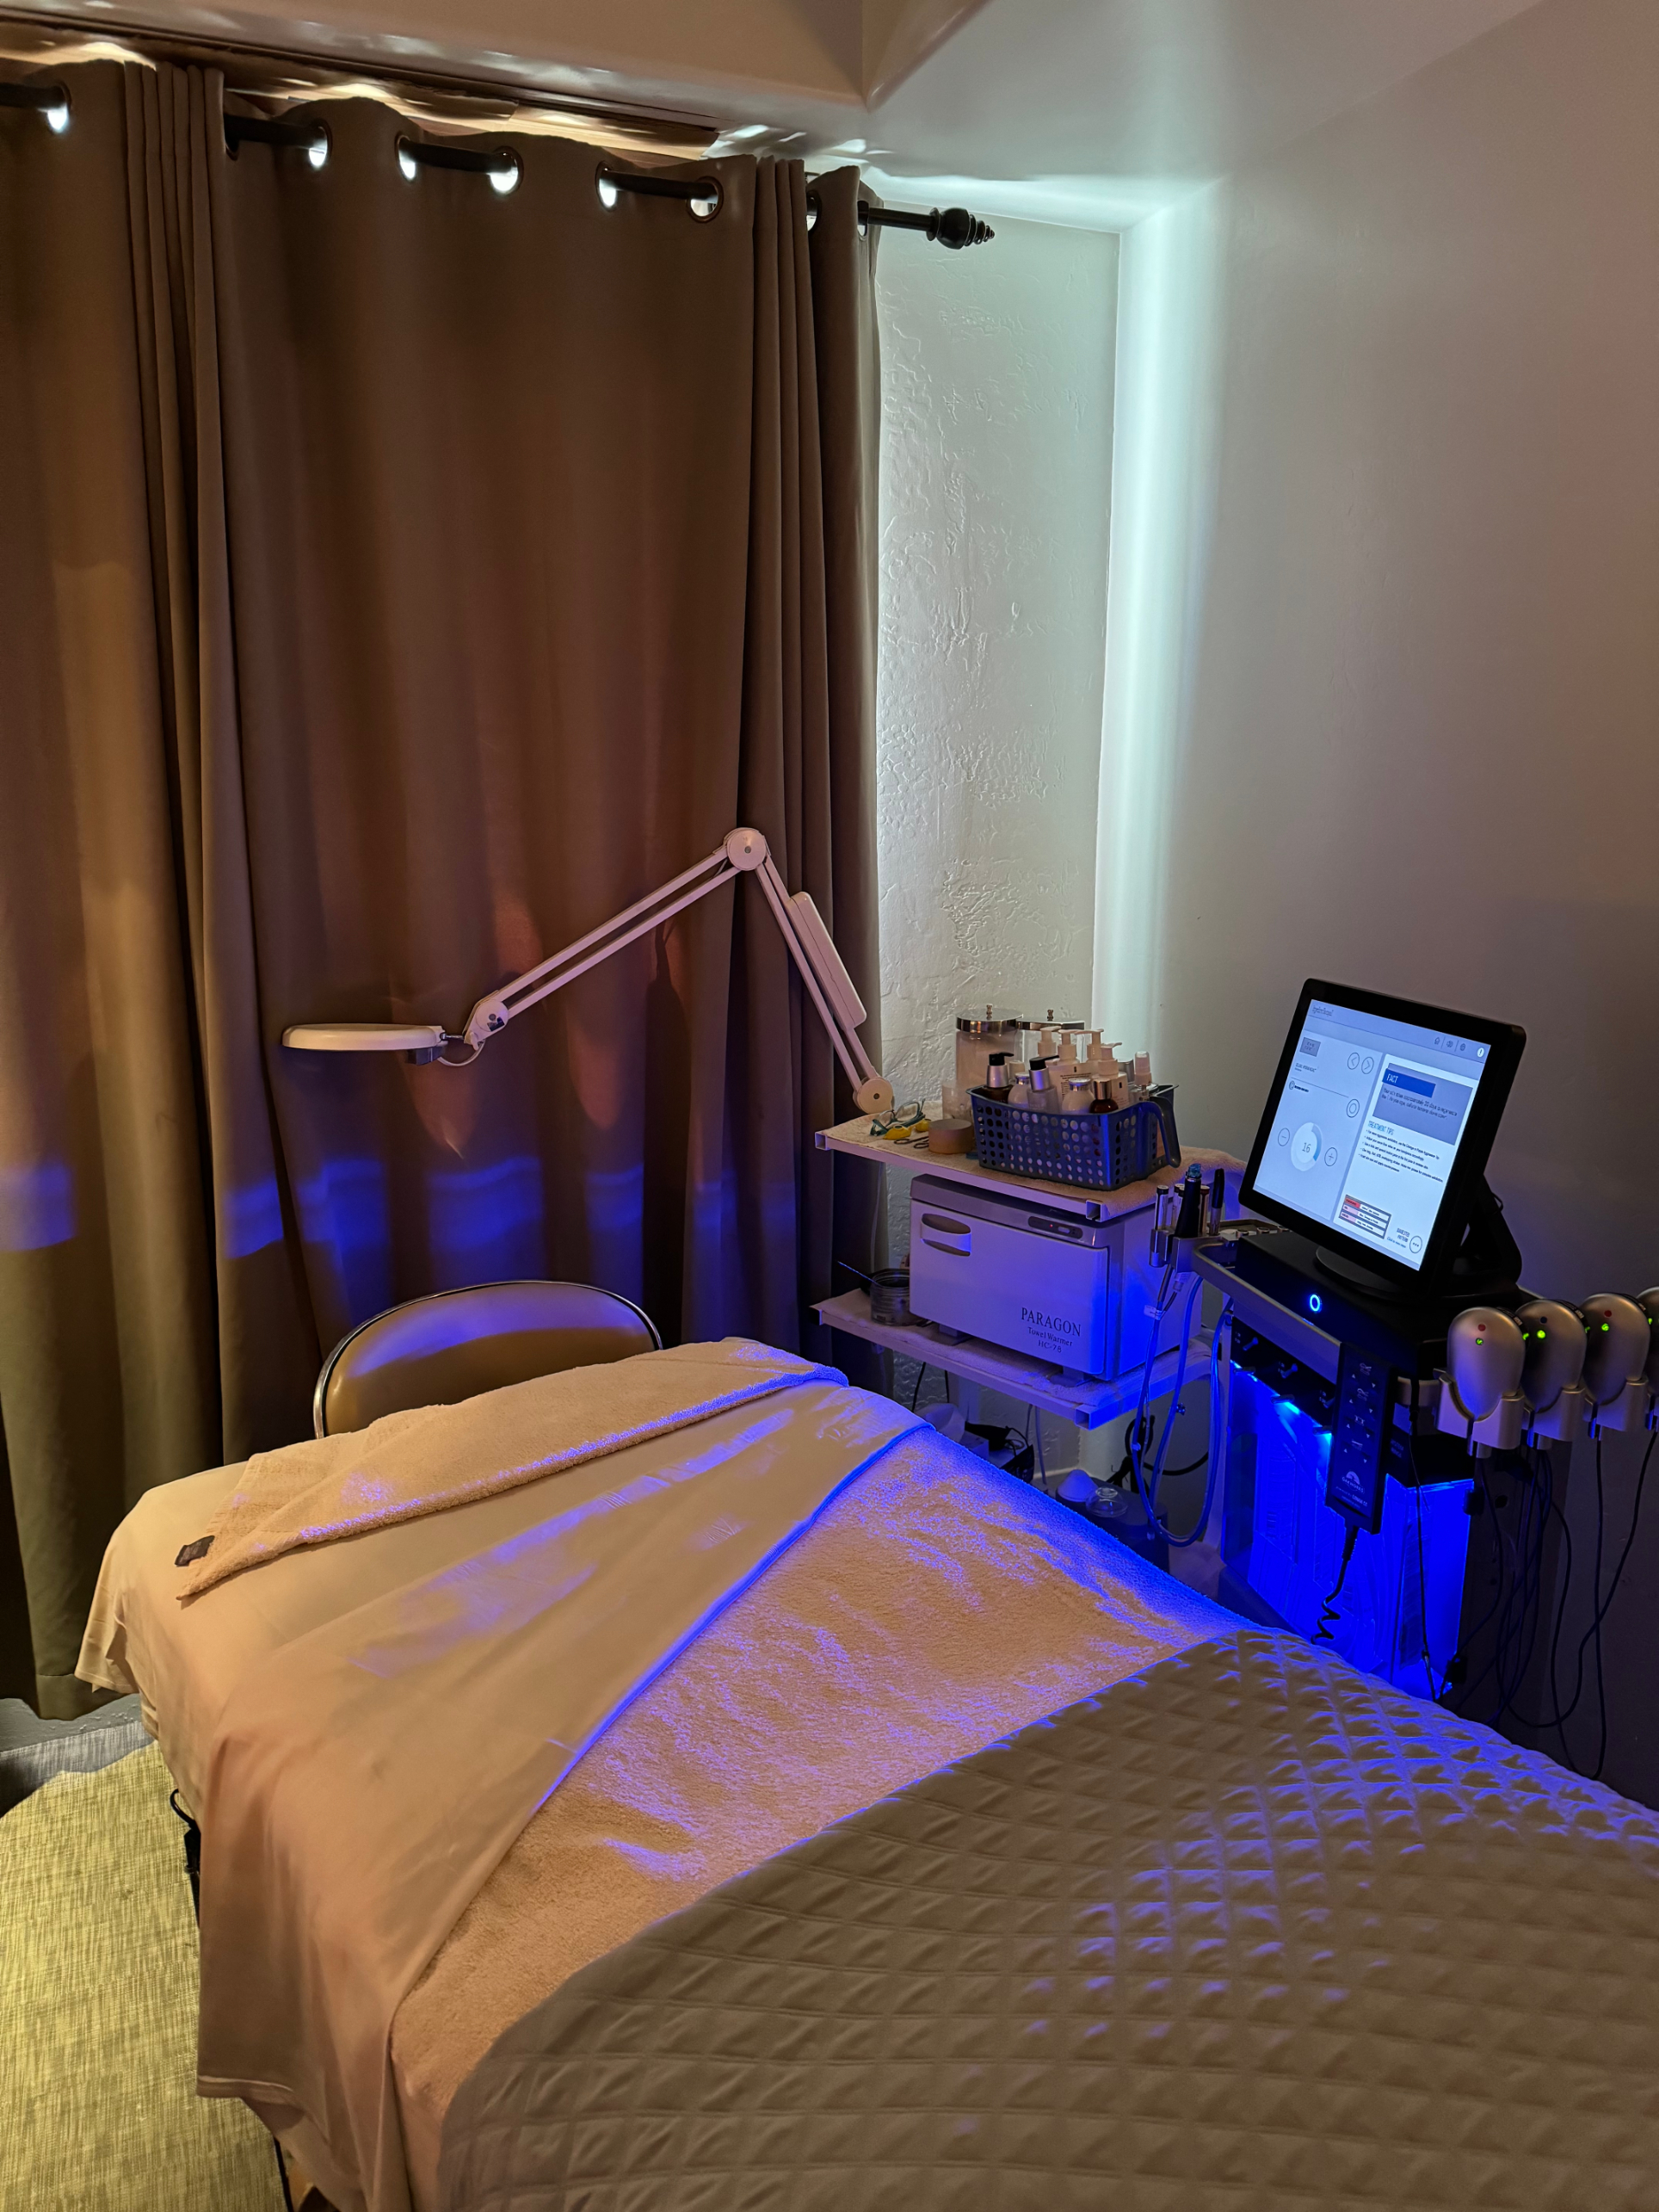 Massage table in a room with a computer setup and dim lighting, suggesting high-tech spa services for travelers